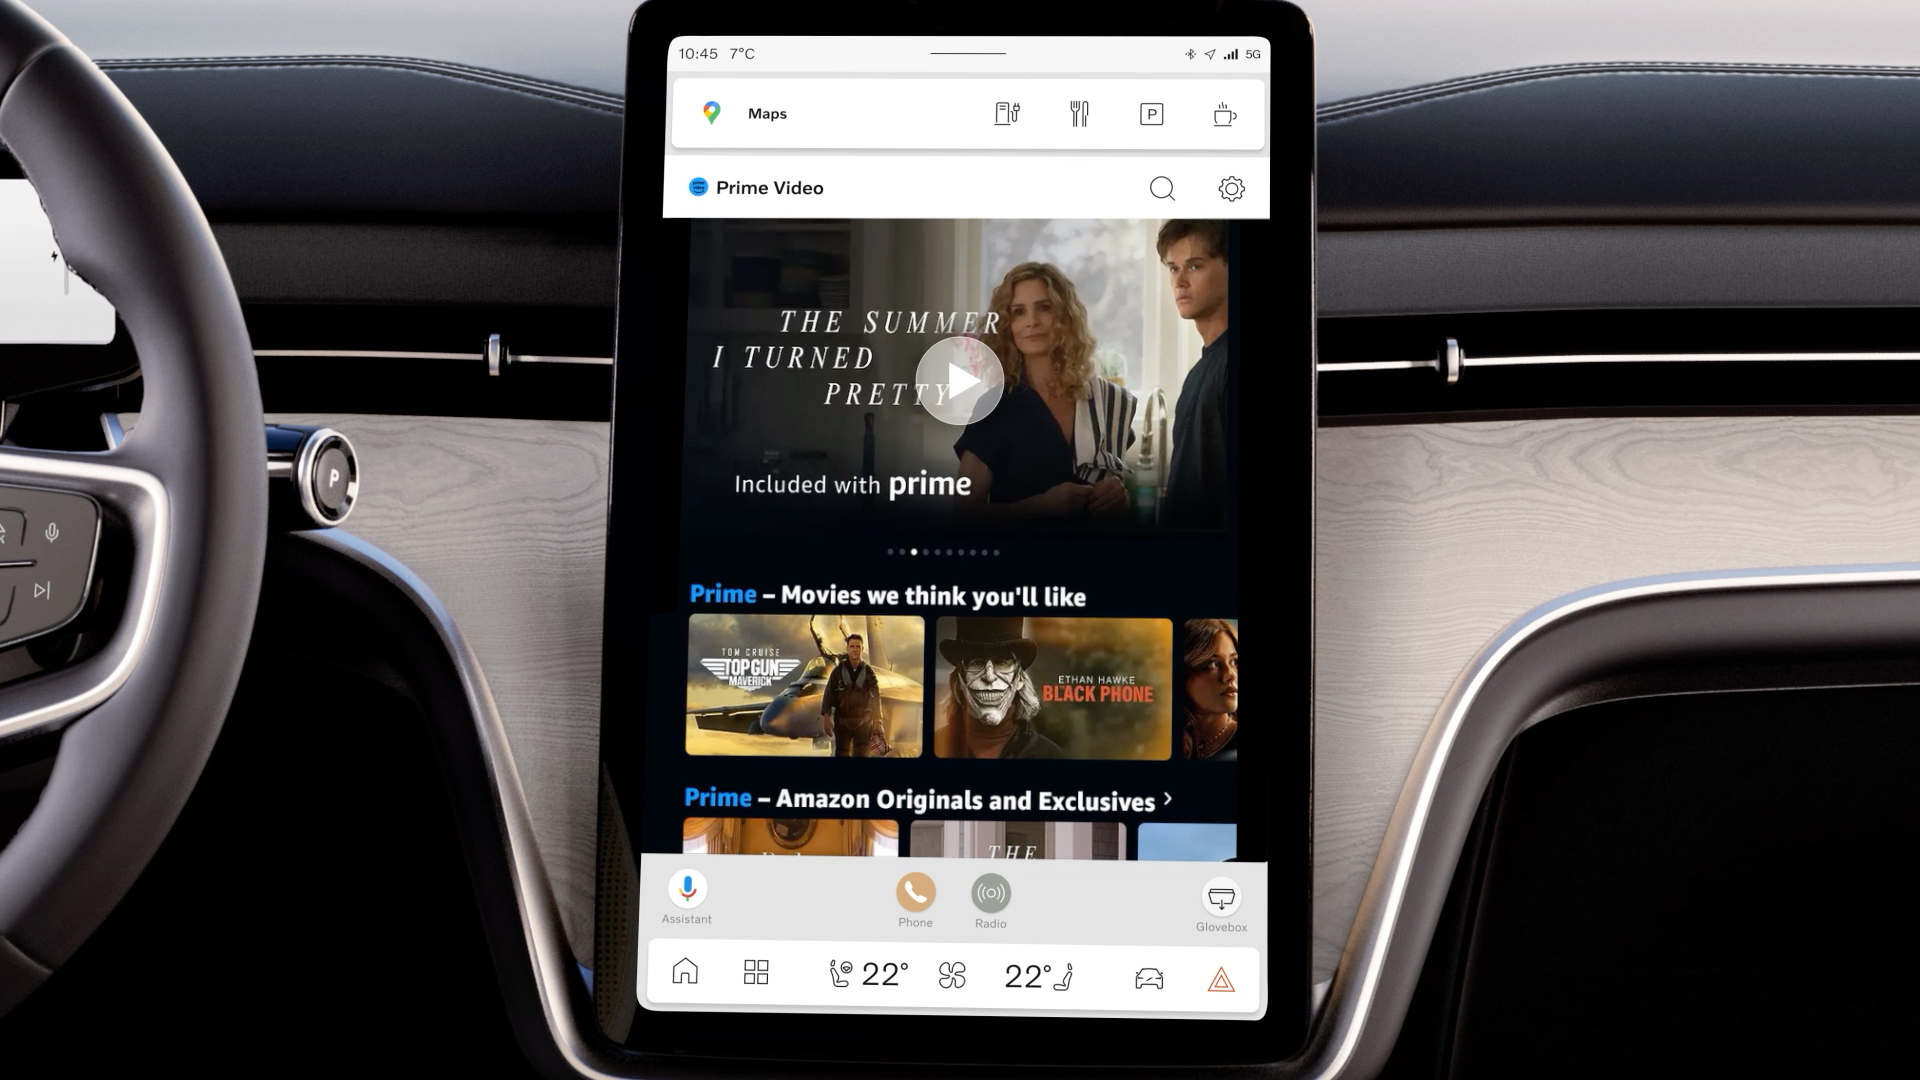 Prime Video shown on a Google built-in car display.